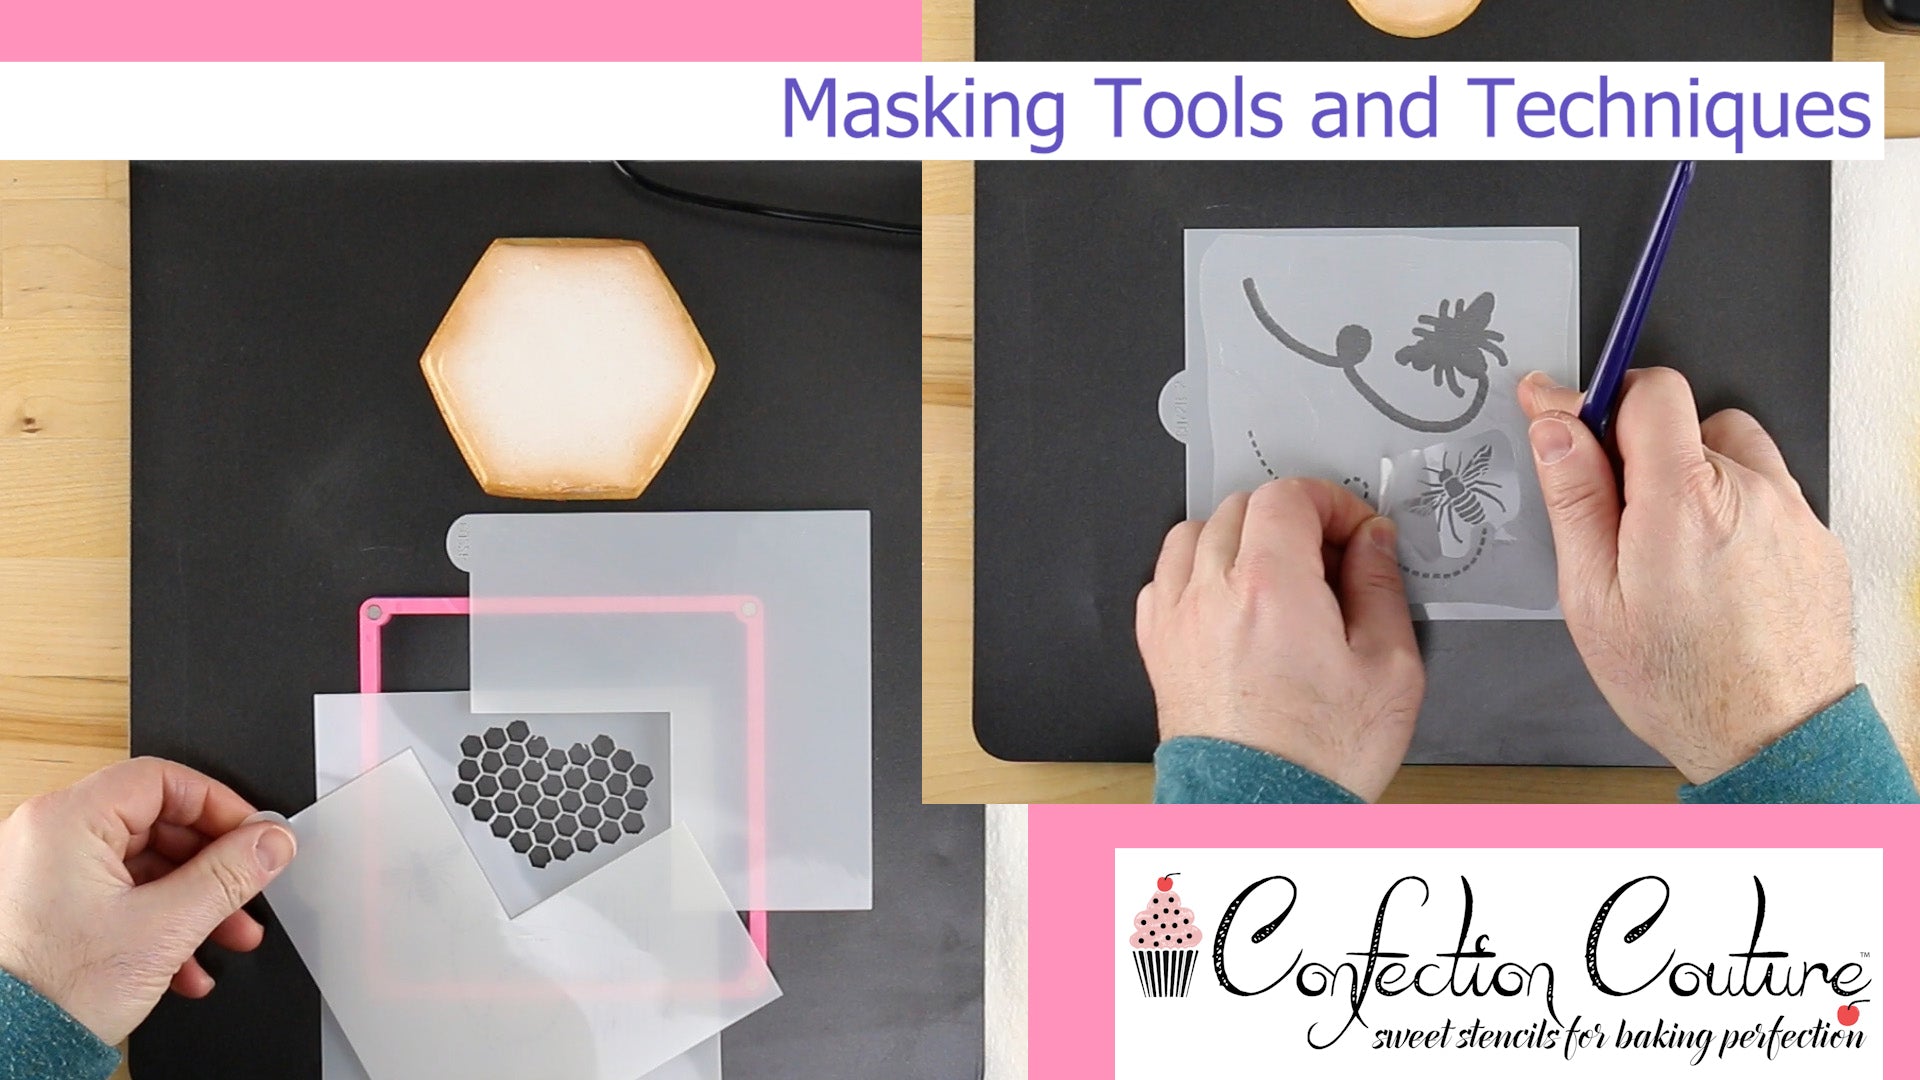 Gyro-Cut Crafts and Hobby Cutting Tool – Confection Couture Stencils